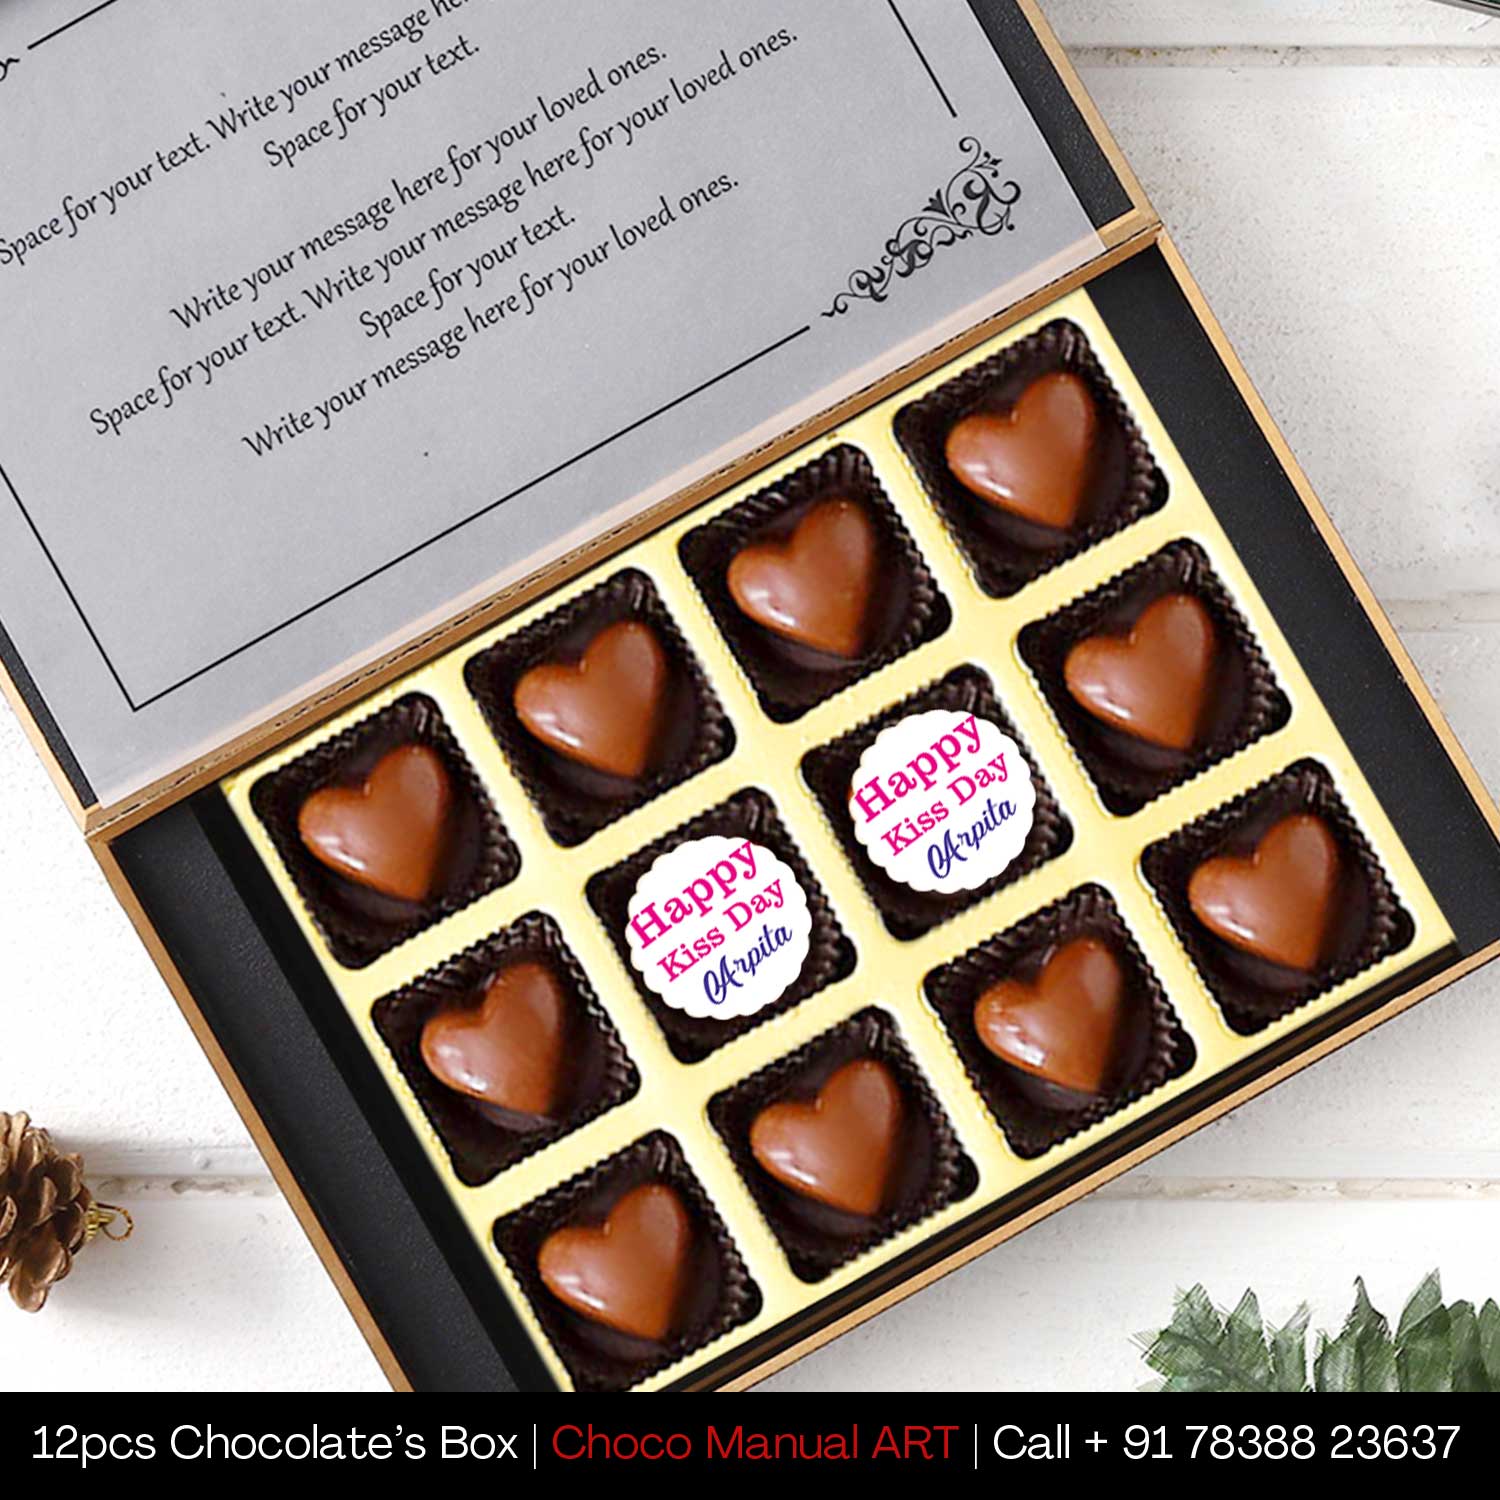 Customised Chocolate gift for Kiss Day